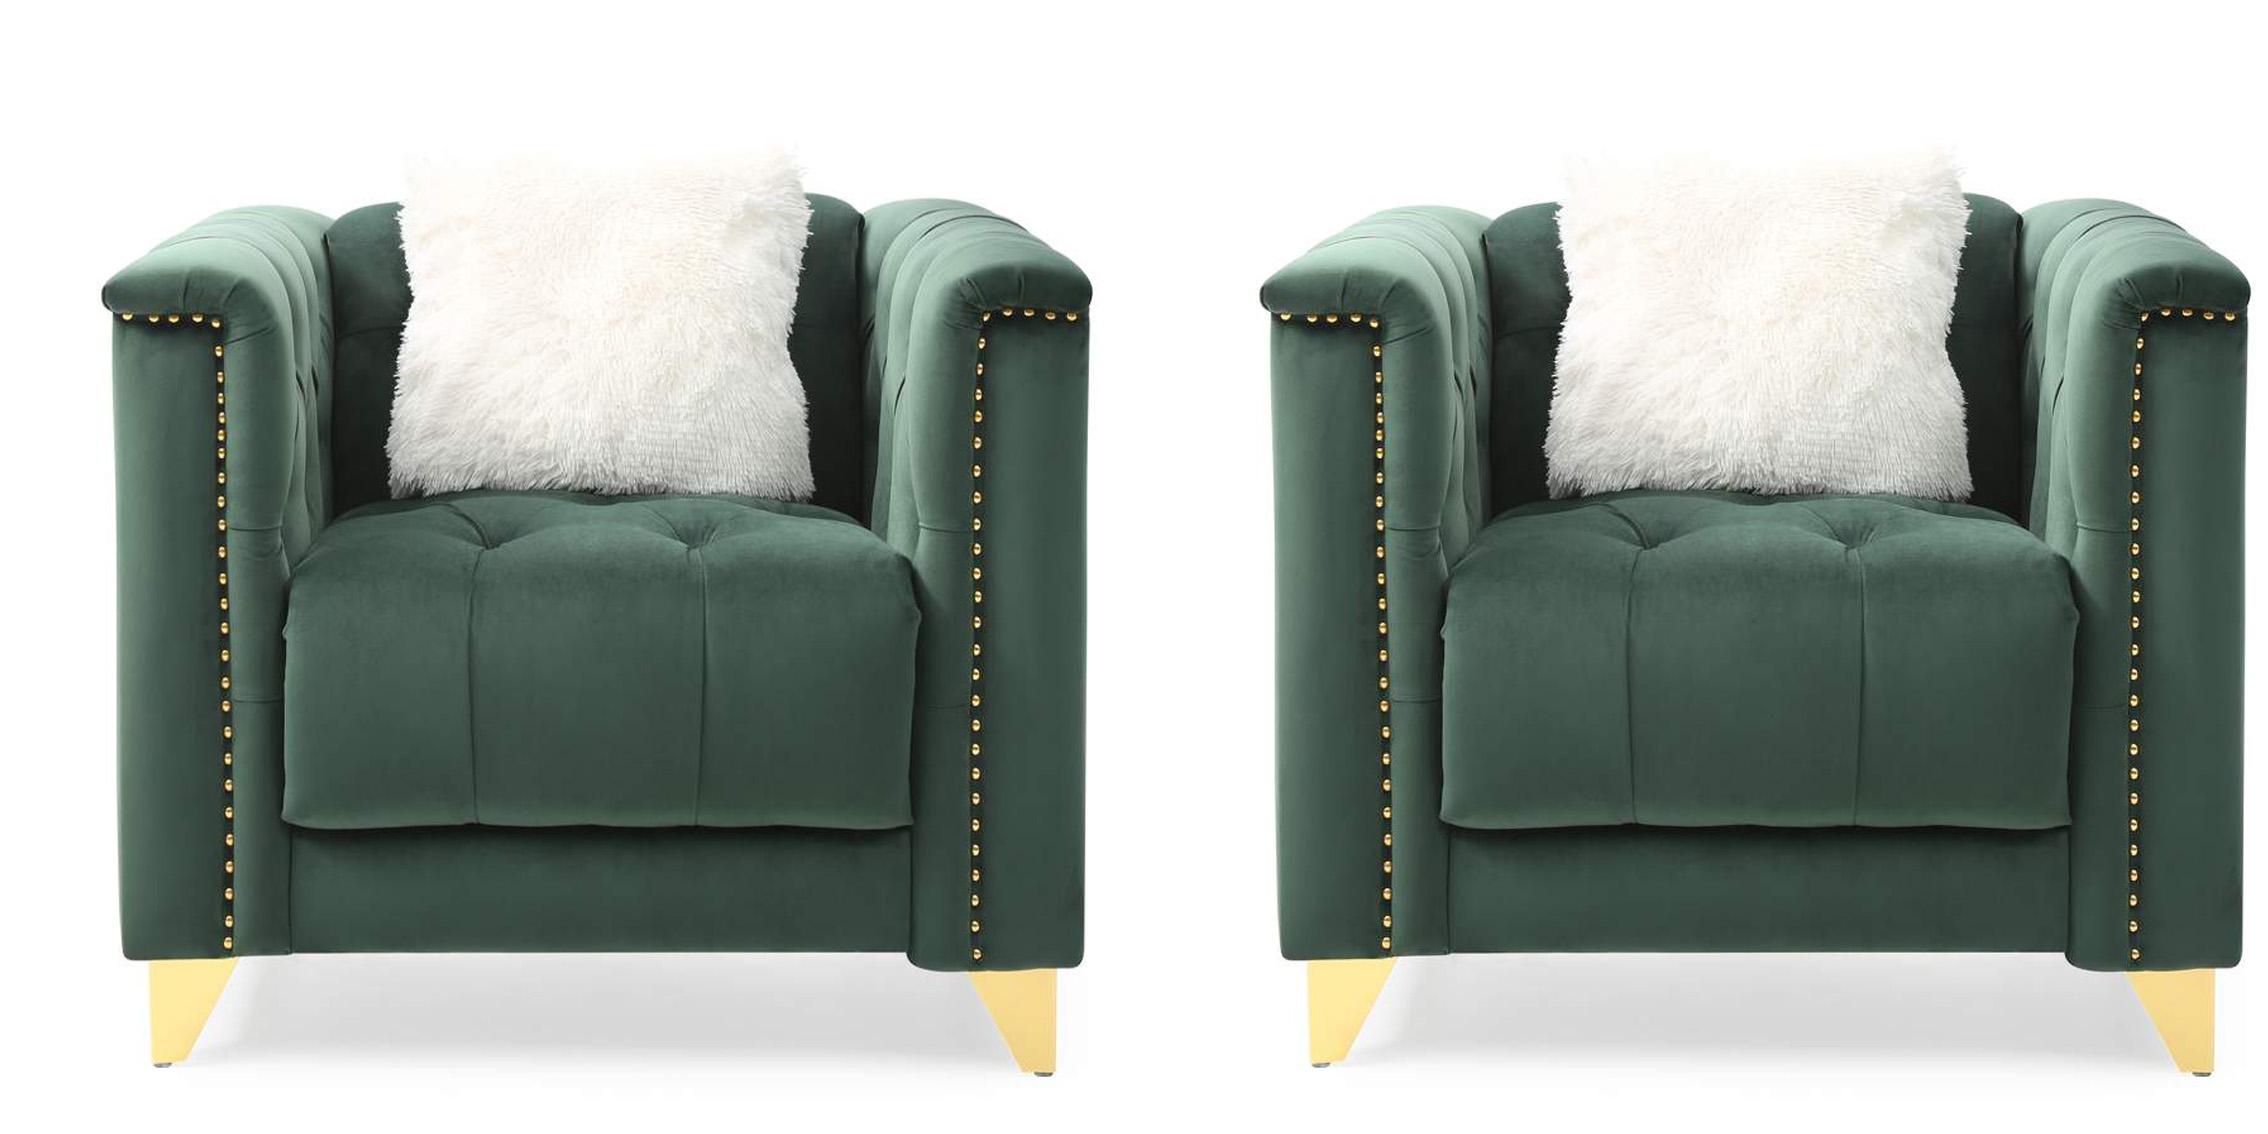 Contemporary, Modern Arm Chair Set RUSSELL 733569370917-2PC in Green Fabric